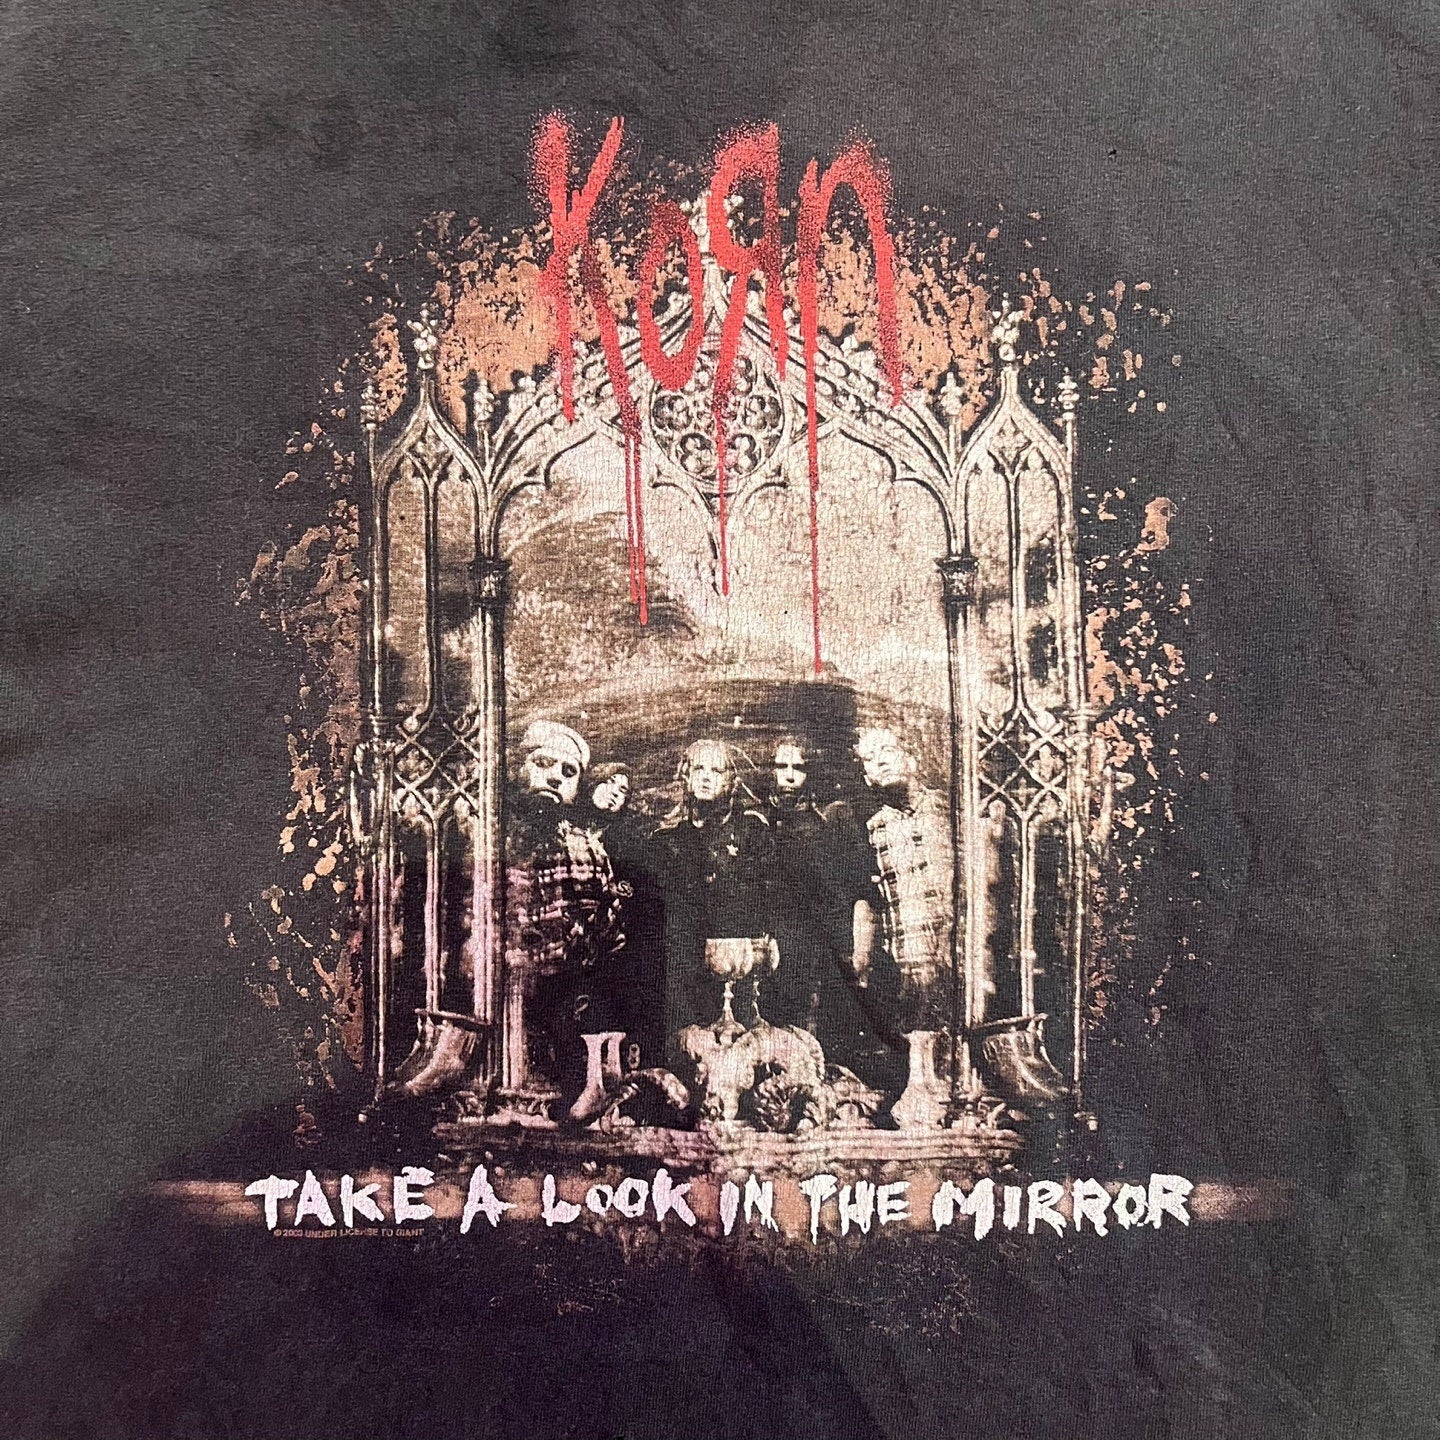 Vintage Korn "Take A Look In The Mirror" Album T-Shirt | Vintage Band Shirt | Vintage Korn T-Shirt | Men's Size Small | SKU: STQ-3307